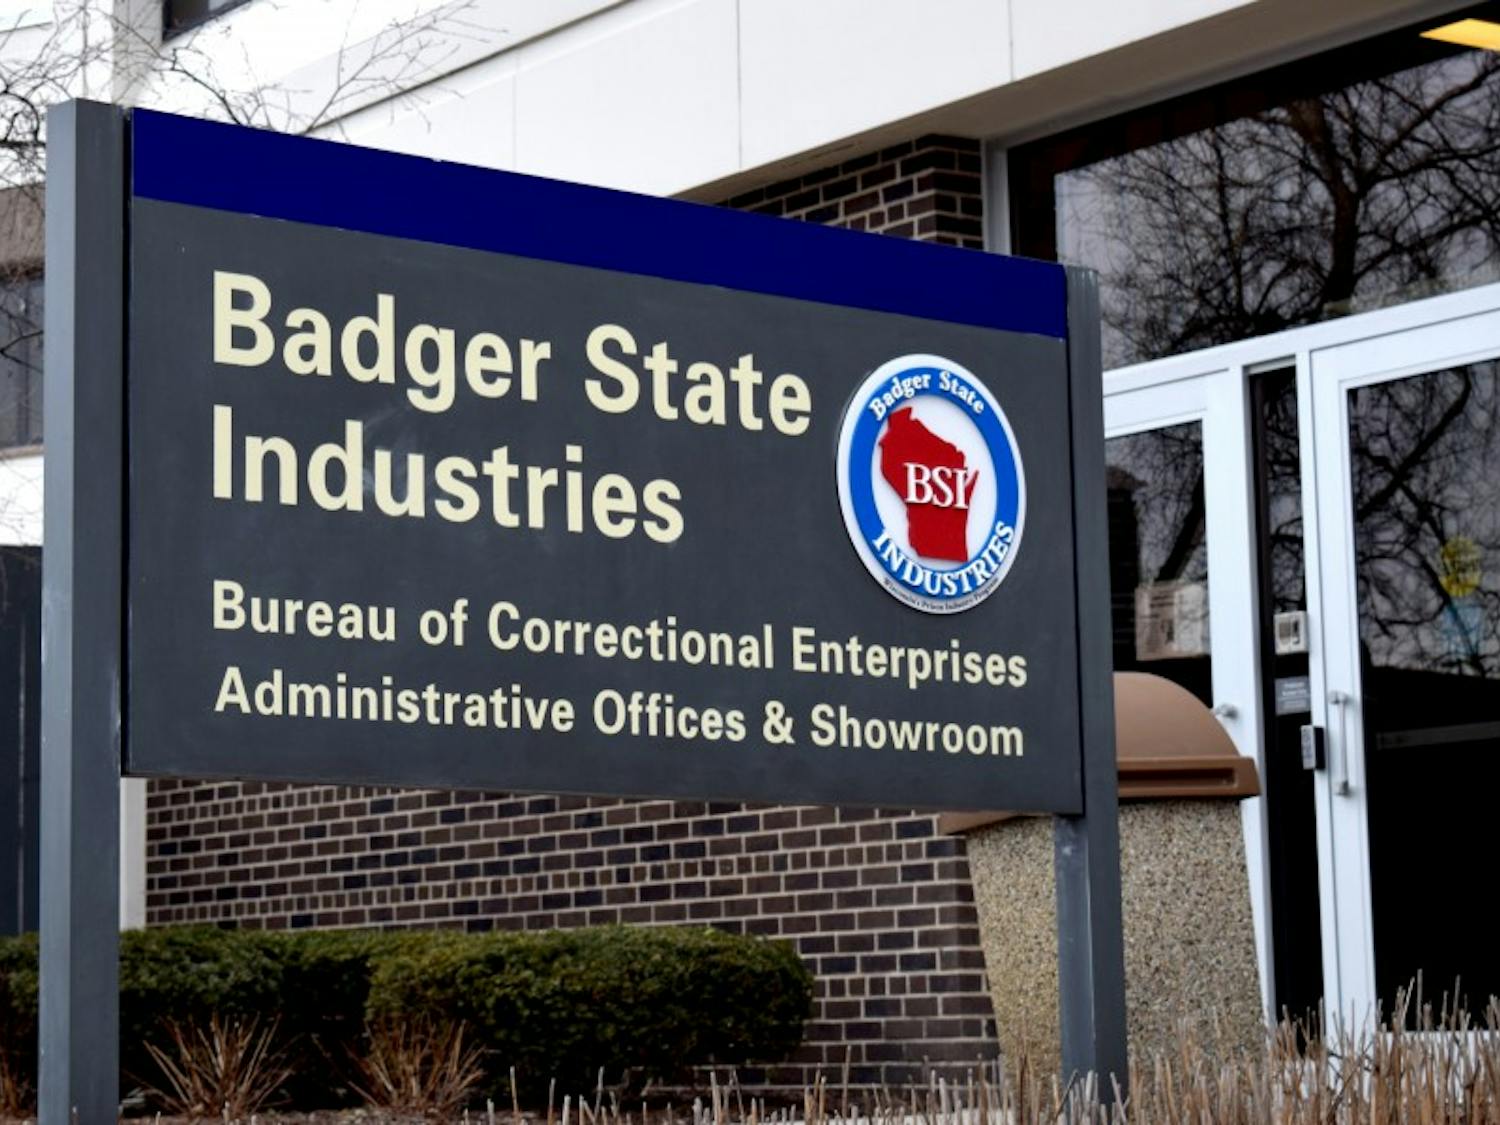 Wisconsin state statutes obligate UW-Madison to purchase prison-produced goods from Badger State Industries, and the university spent nearly $1.6 million on these in the 2015 fiscal year.